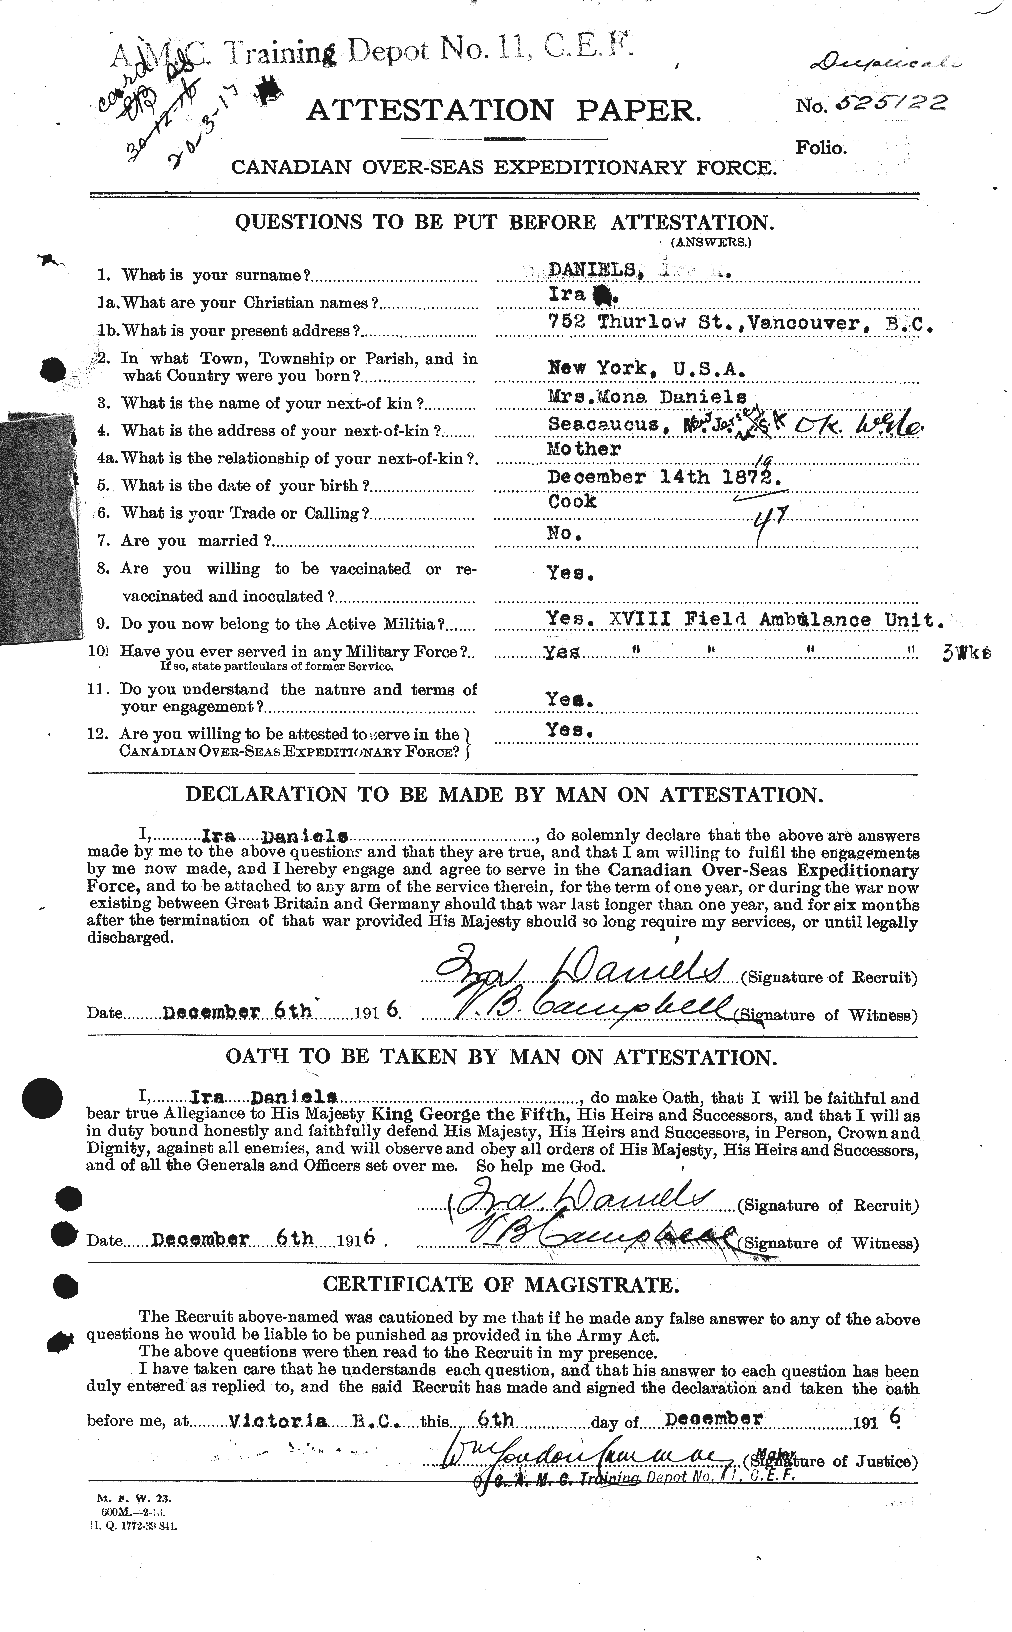 Personnel Records of the First World War - CEF 279623a